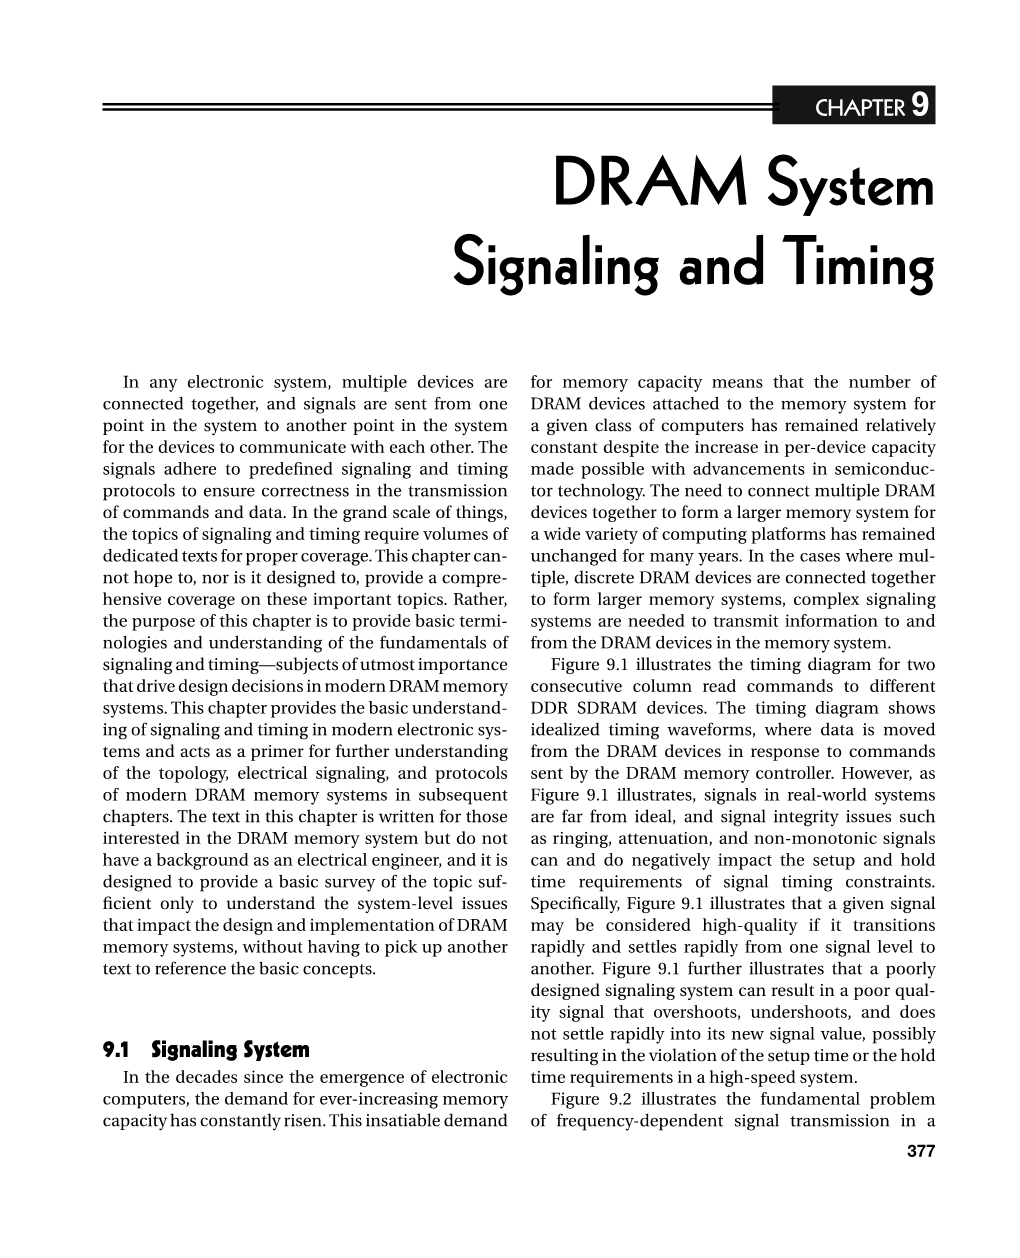 DRAM System Signaling and Timing